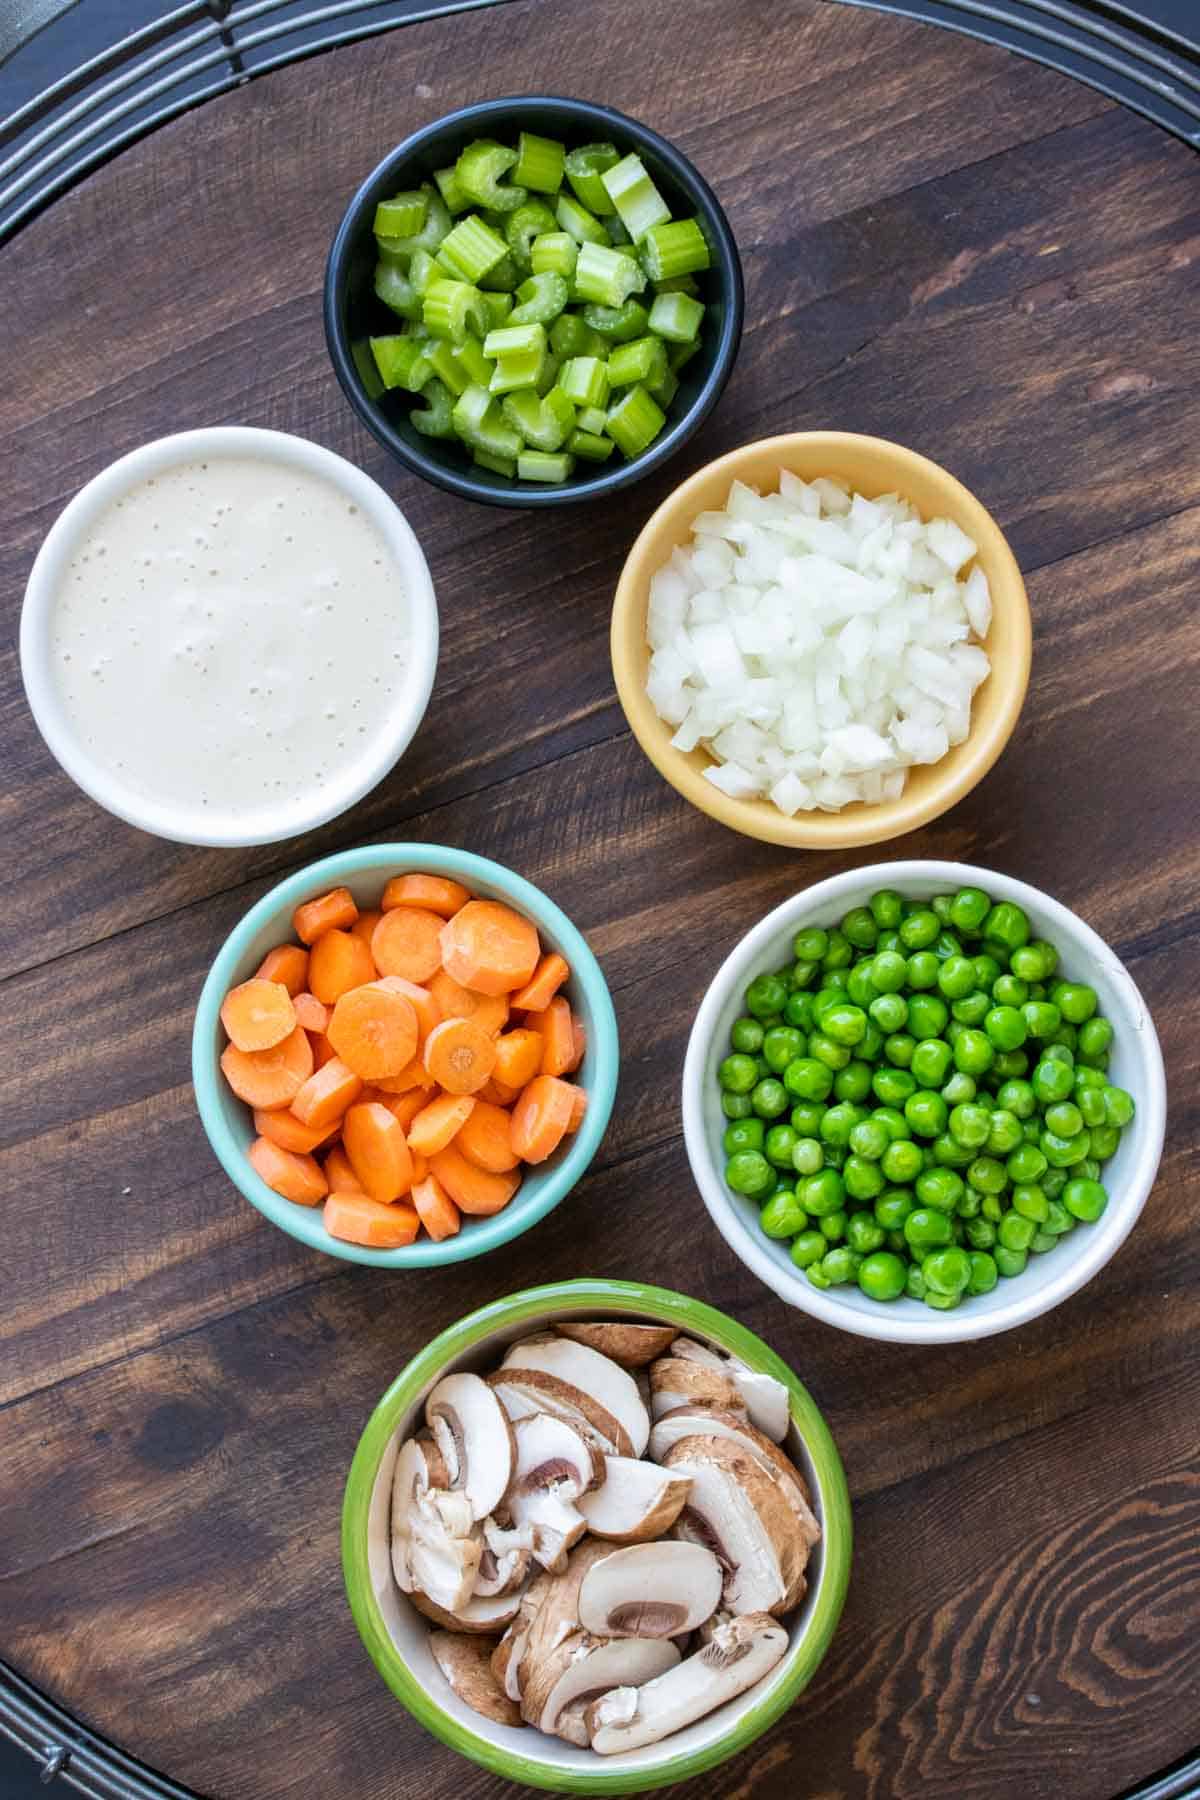 Different colored bowls filled with veggies on a wooden surface